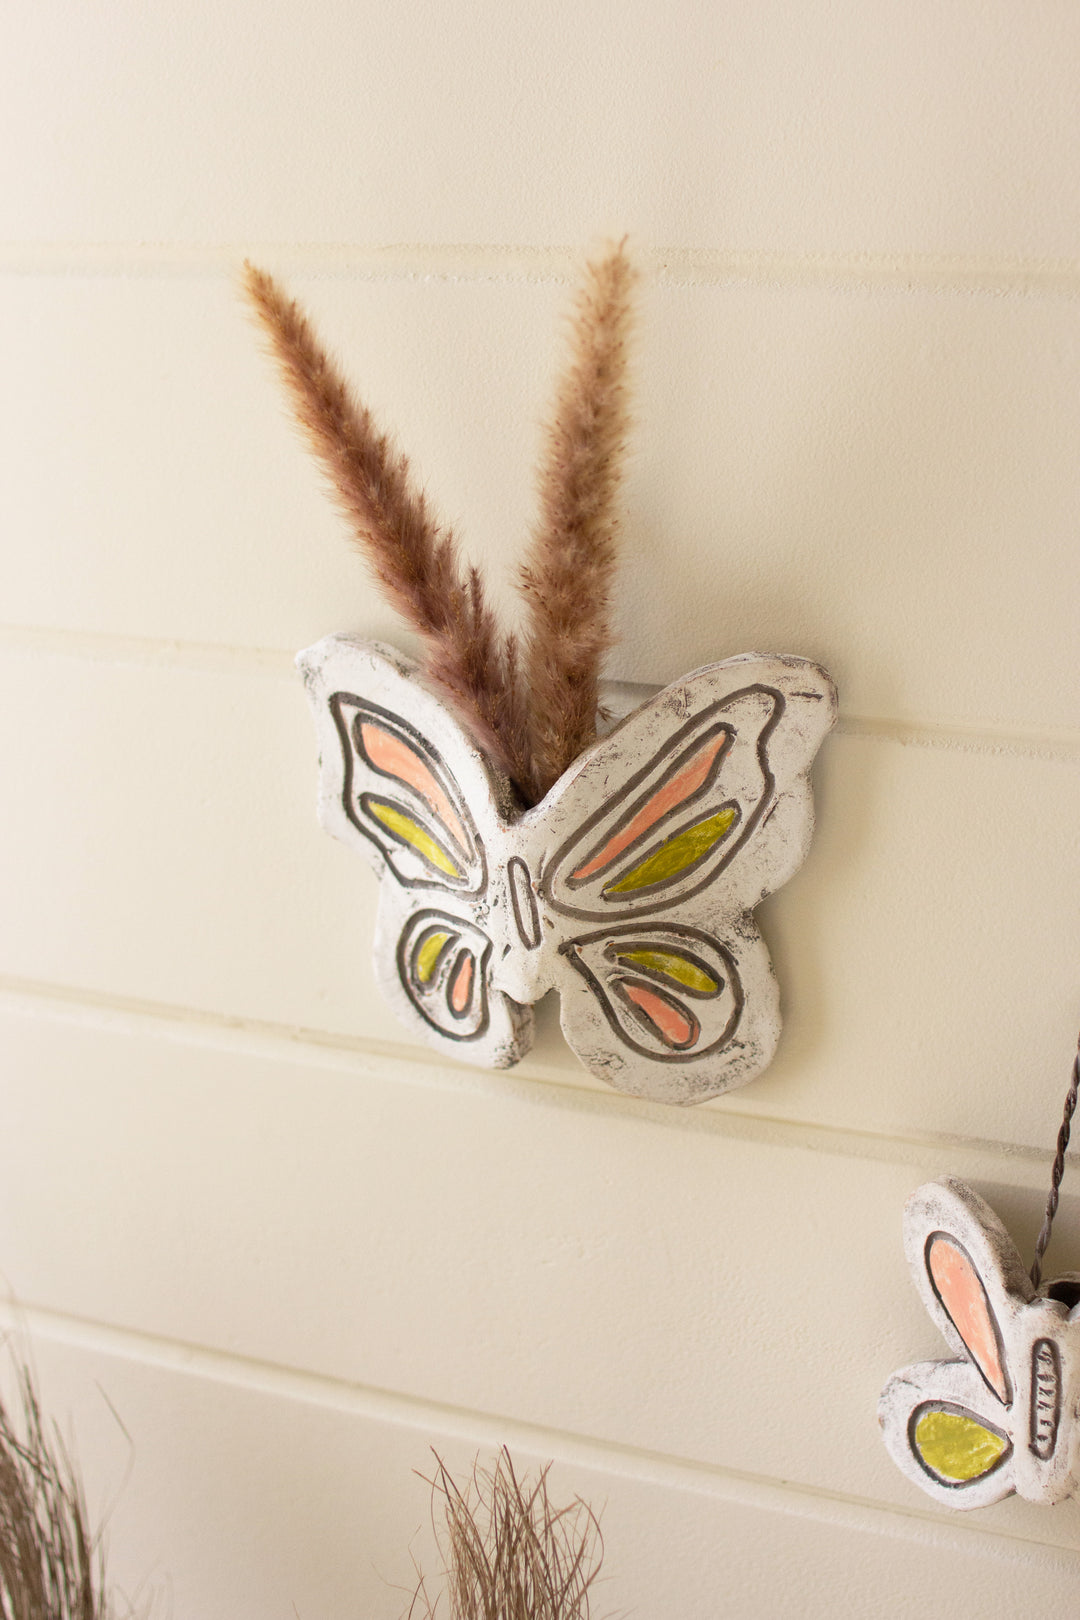 Set Of 3 Hanging Clay Butterfly Bud Vases